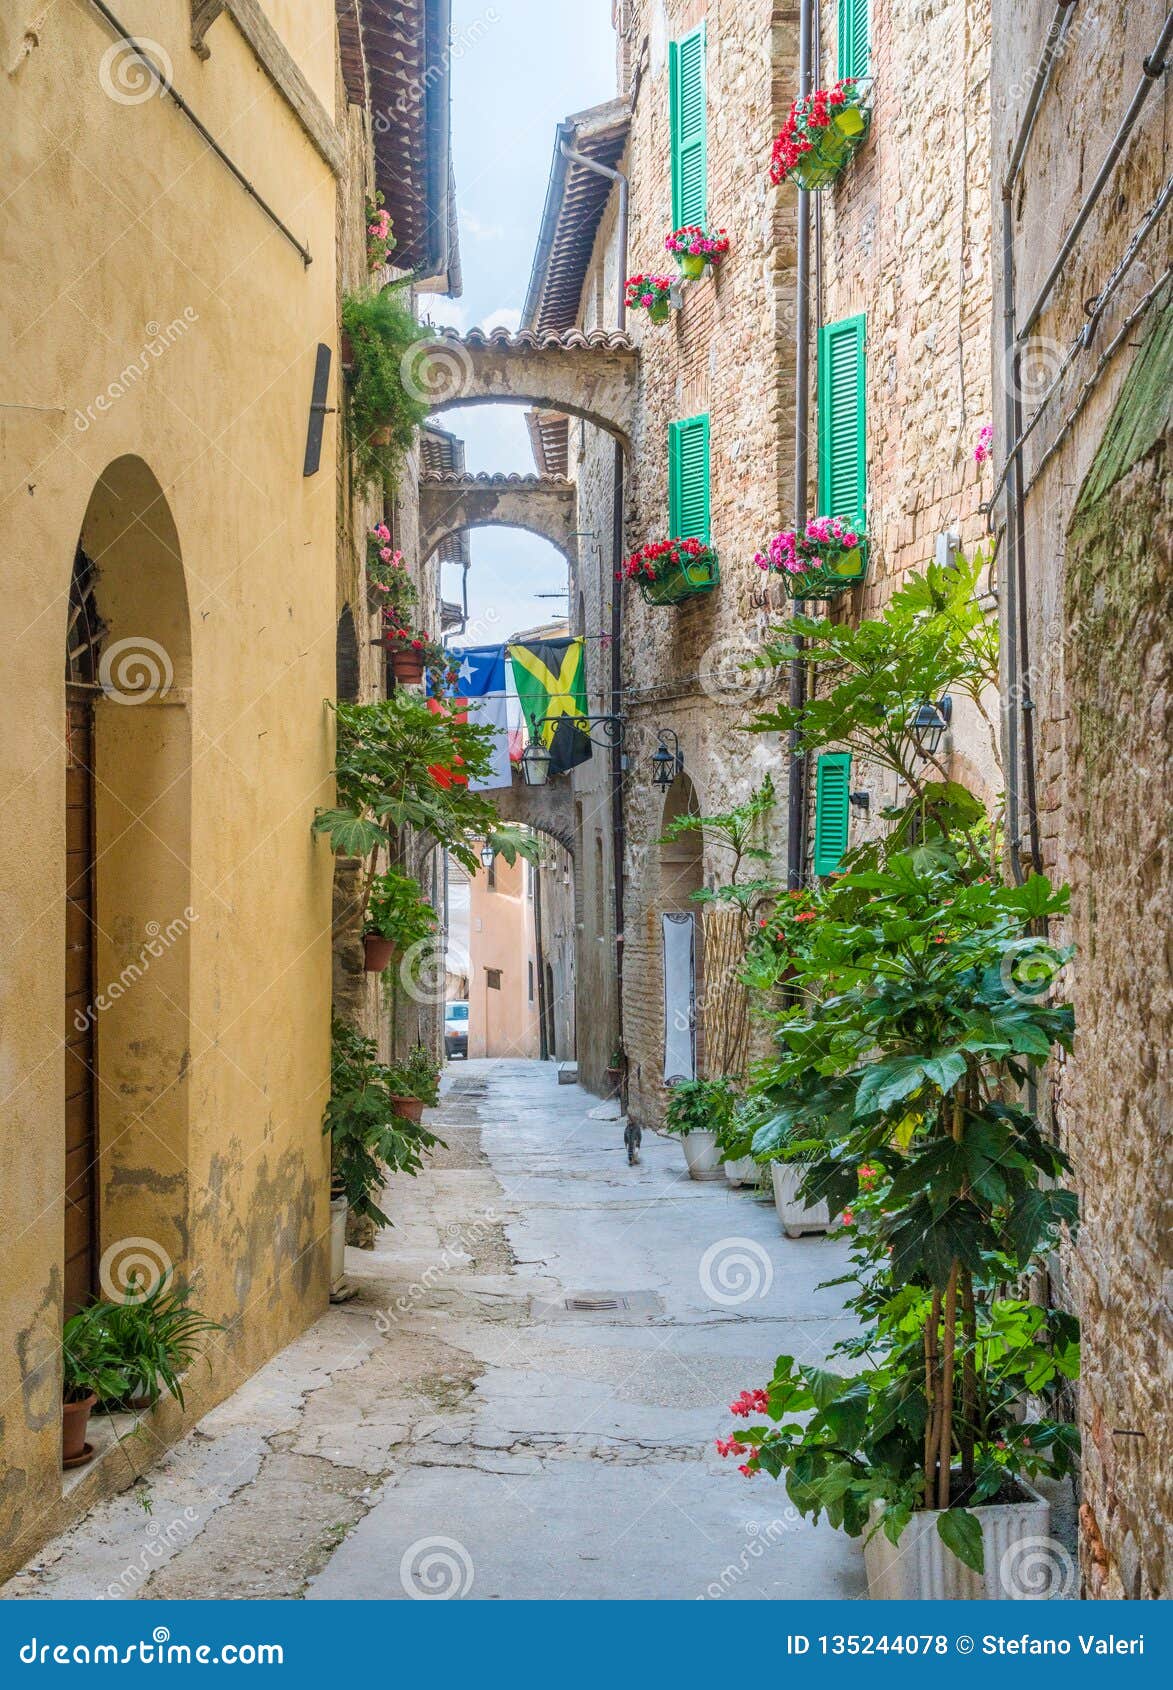 scenic sight in bevagna, ancient town in the province of perugia, umbria, central italy.